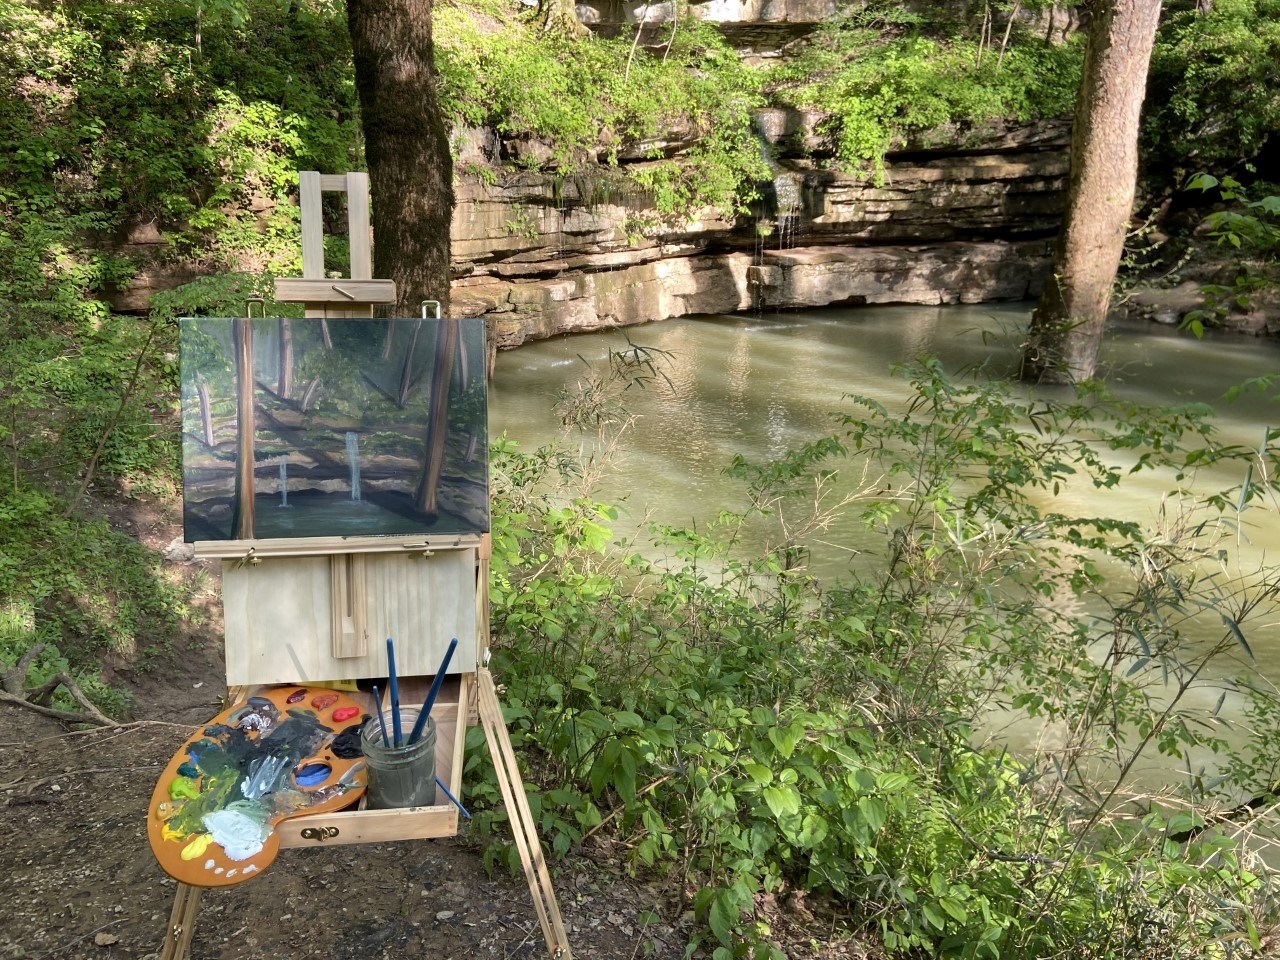 An artist easel displays a painting of a body of water in a forest area while the same body of water and forest is displayed in the background.